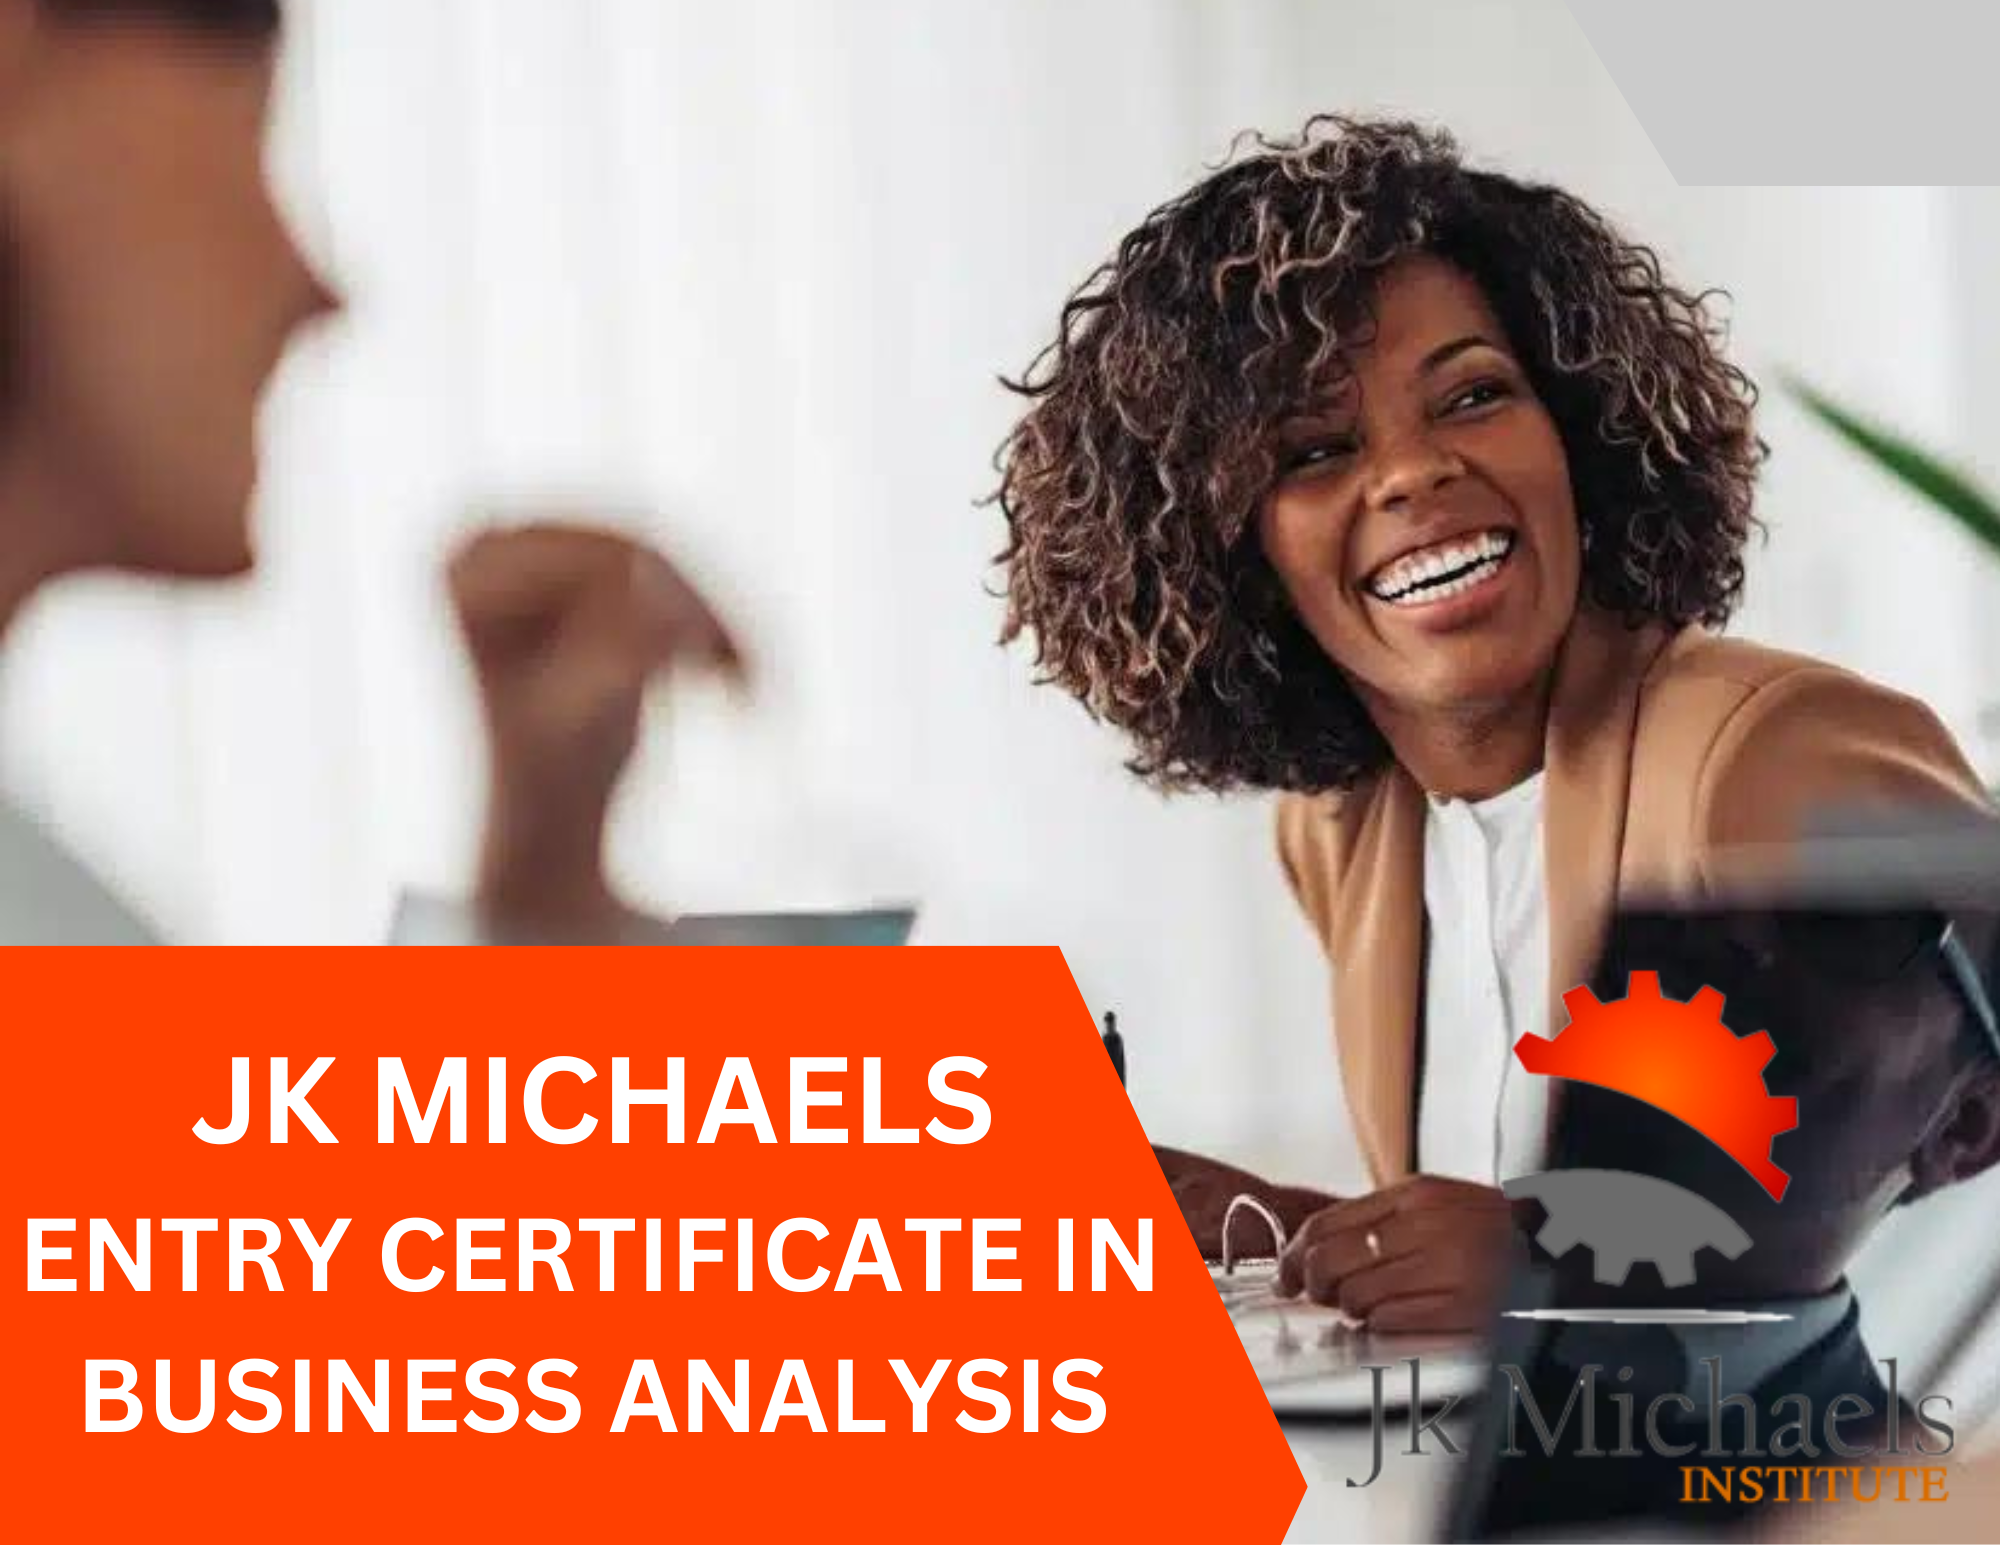 ENTRY CERTIFICATE IN BUSINESS ANALYSIS